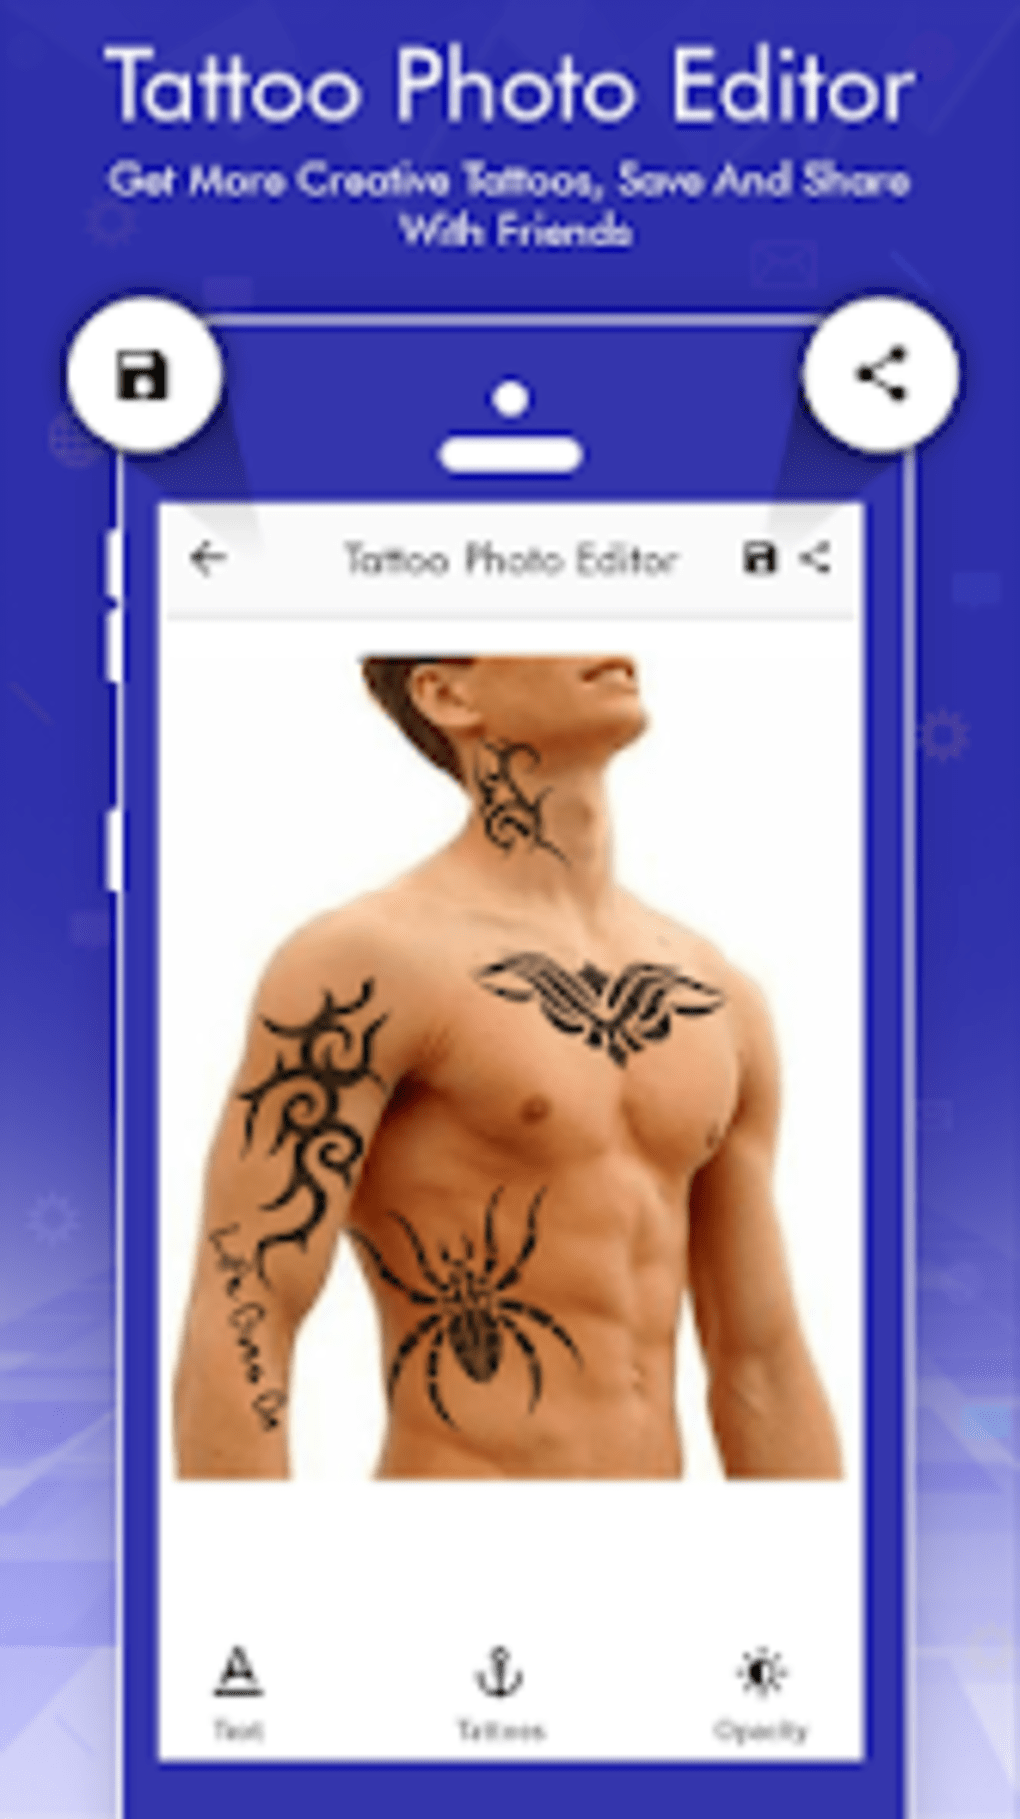 Details 70+ about my name tattoo app unmissable .vn